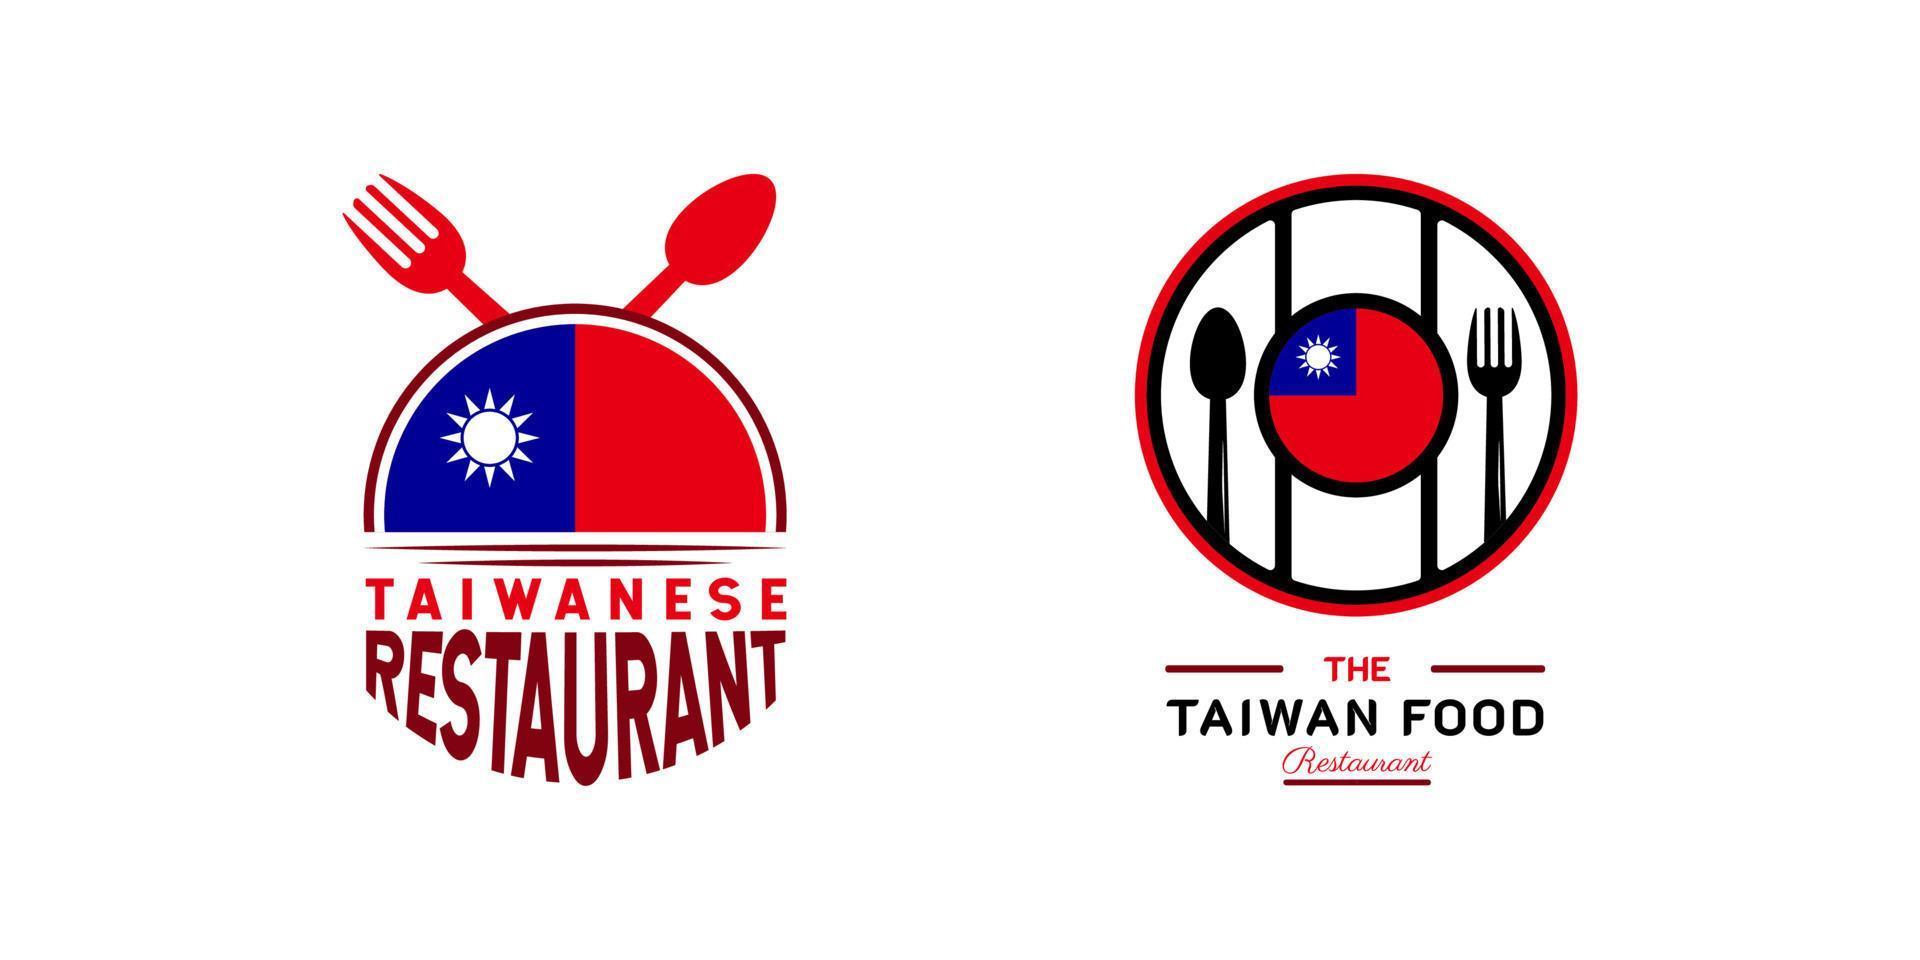 Taiwanese Food Restaurant Logo. Taiwan flag symbol with Sun, Spoon and Fork icons. Luxury and Premium Logo illustration vector